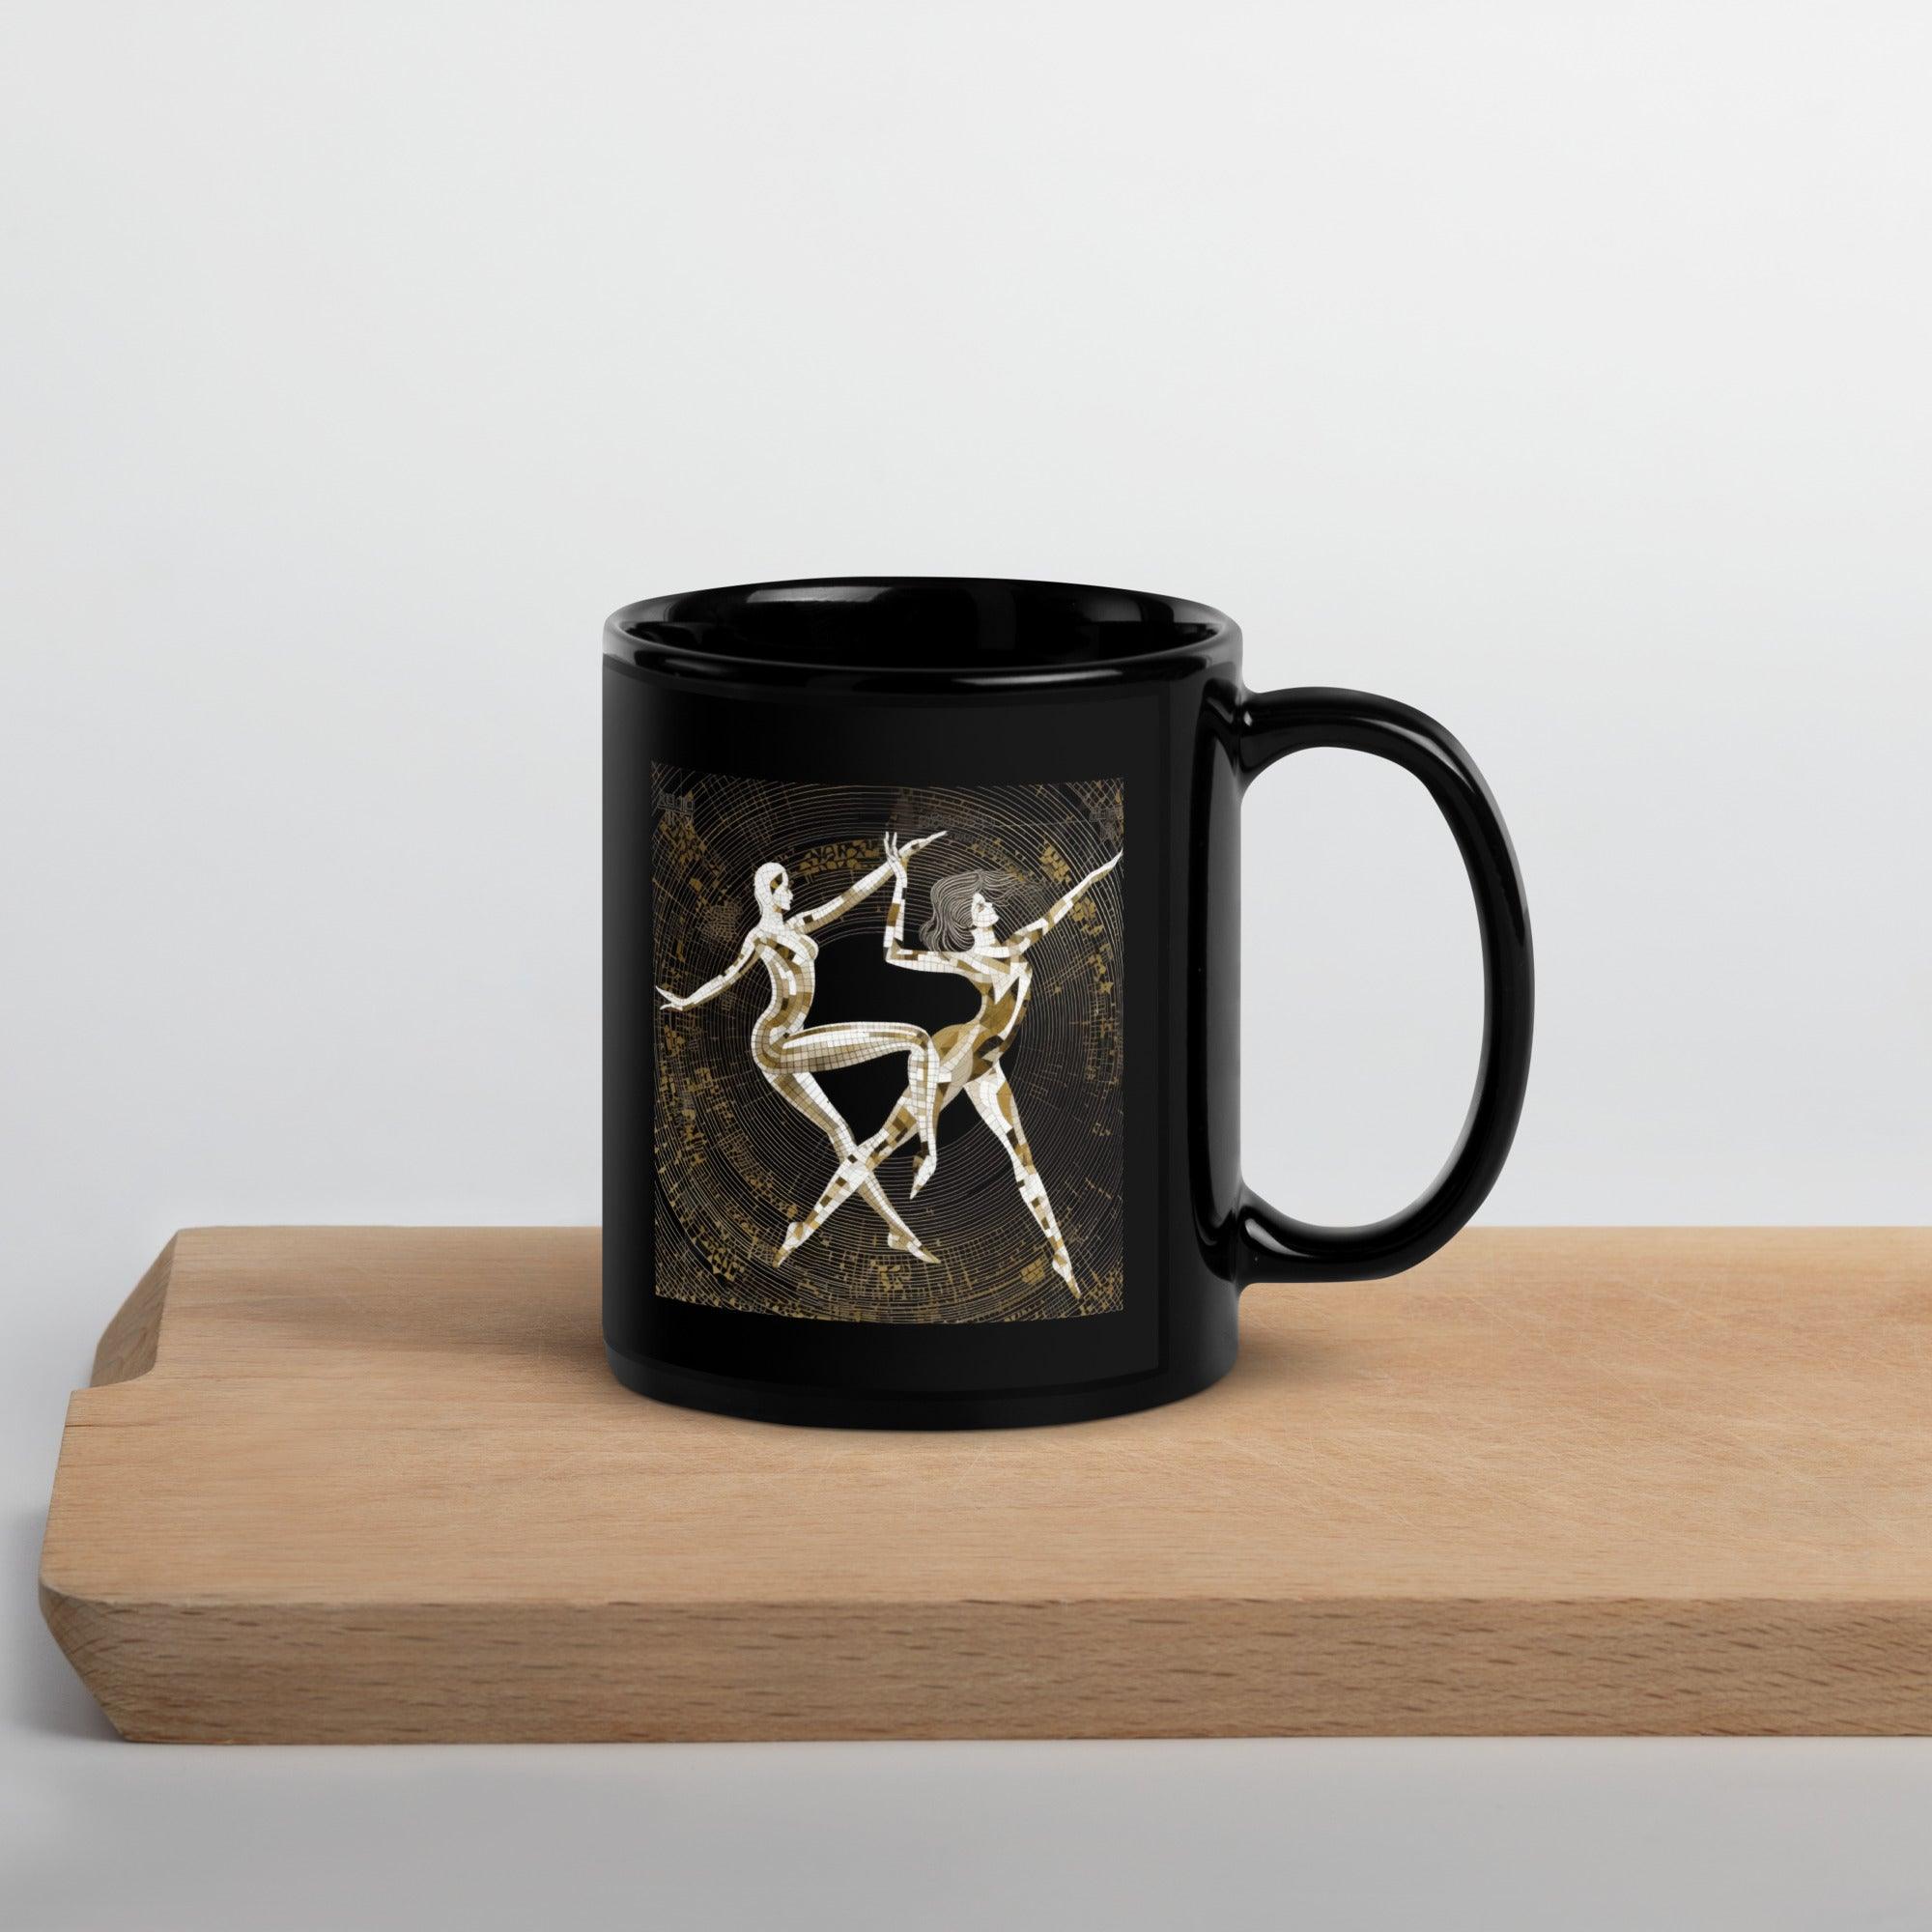 Black mug with balletic extravaganza style on a kitchen counter